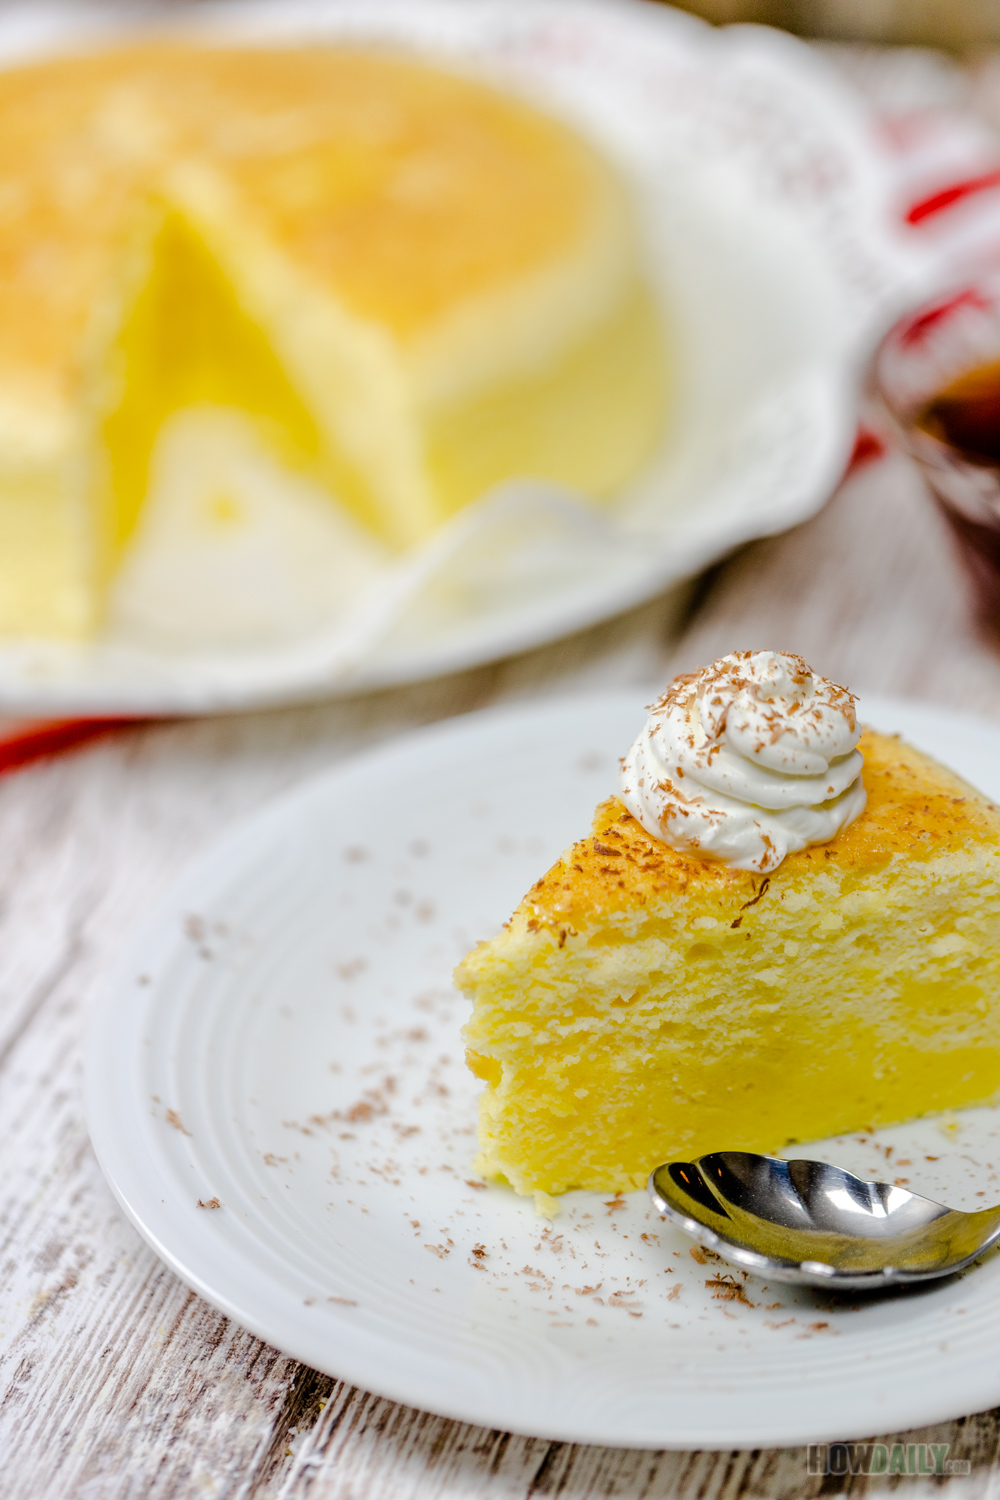 https://howdaily.com/wp-content/uploads/2020/01/Japanese-Cotton-Cheesecake.jpg